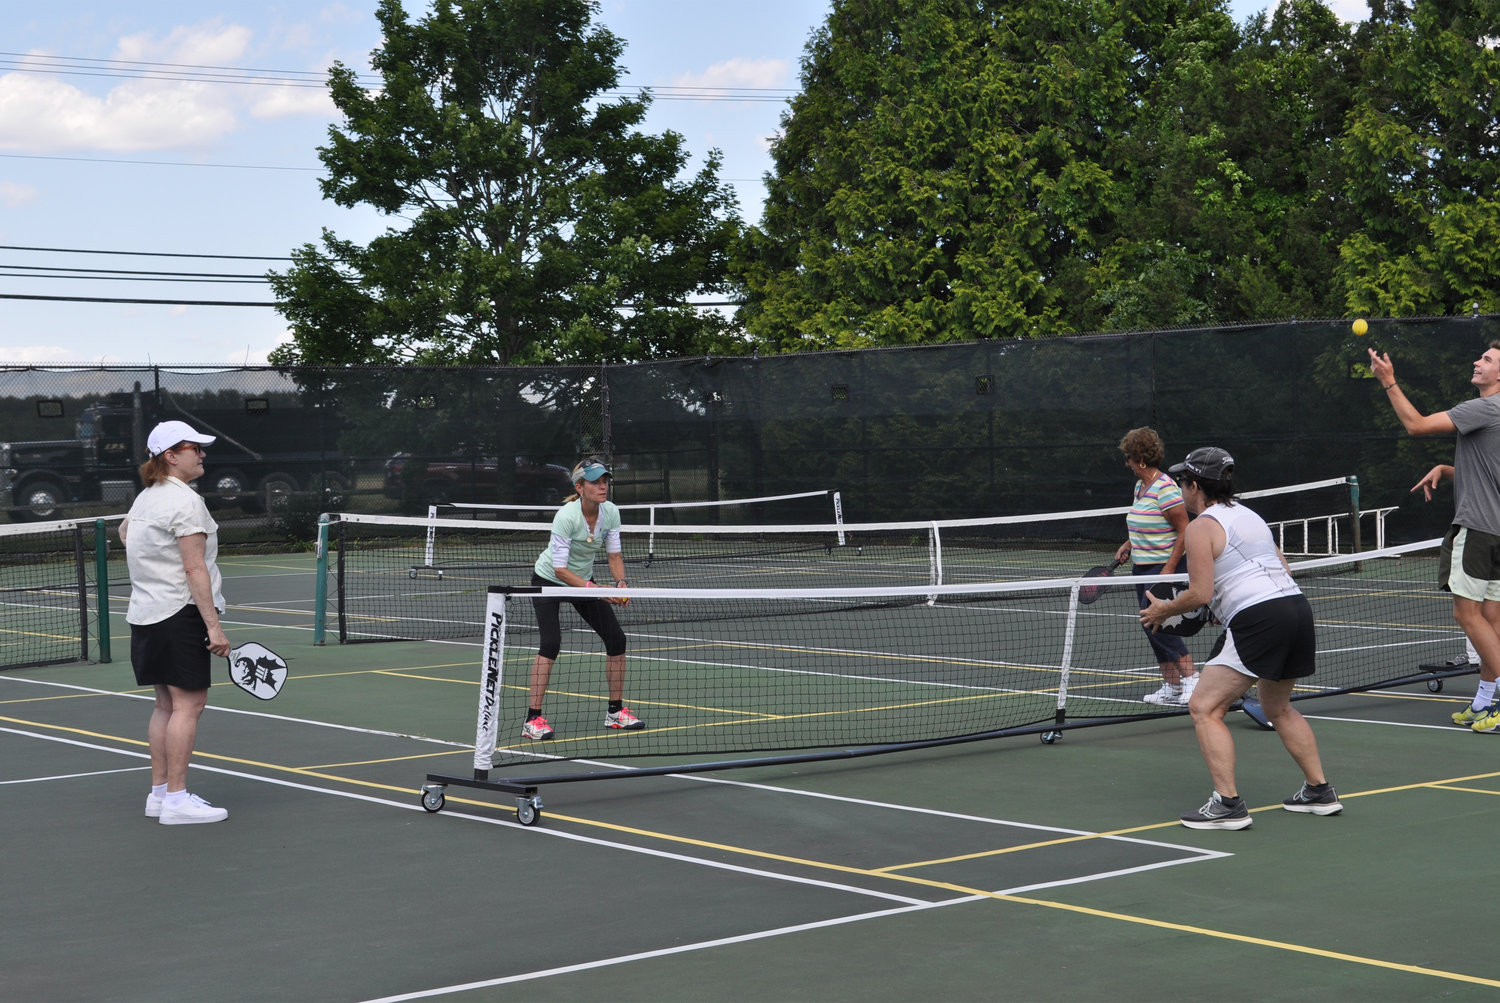 Ocean State Pickleball players volley for points in this all-ages sport